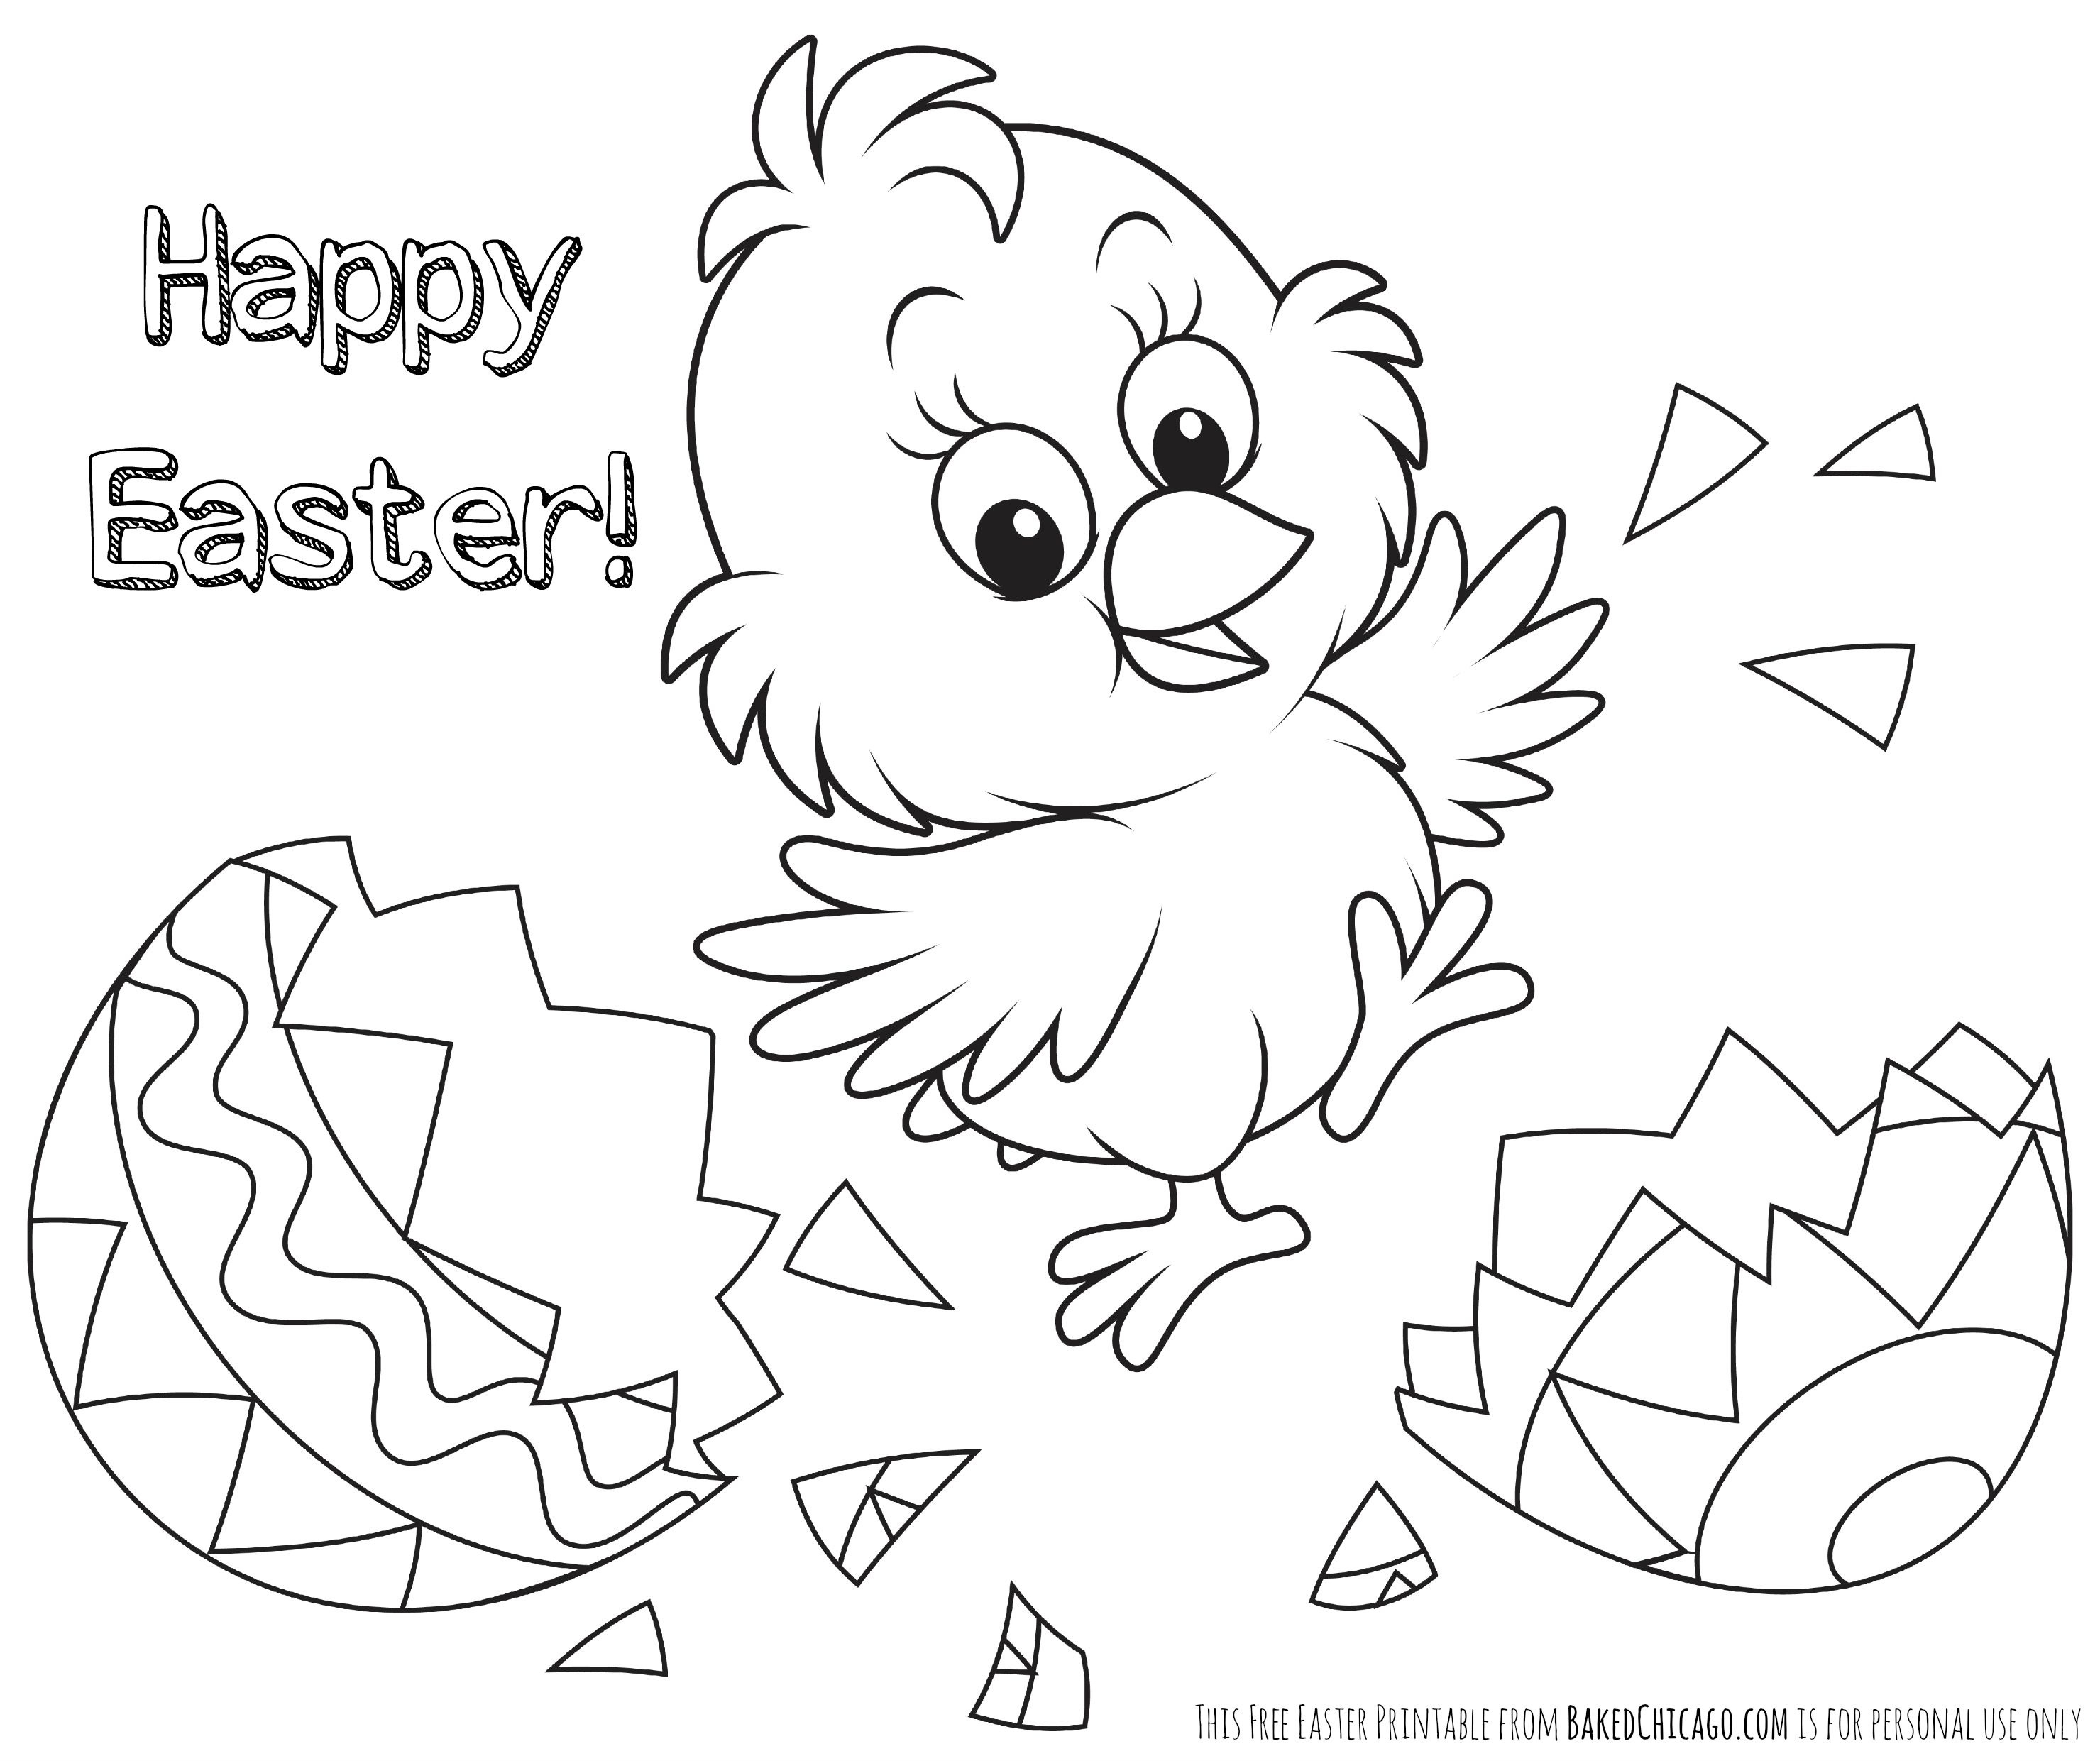 Easter Coloring Pages Printable Bloodbrothers Me Colouring Sheets - Free Easter Color Pages Printable